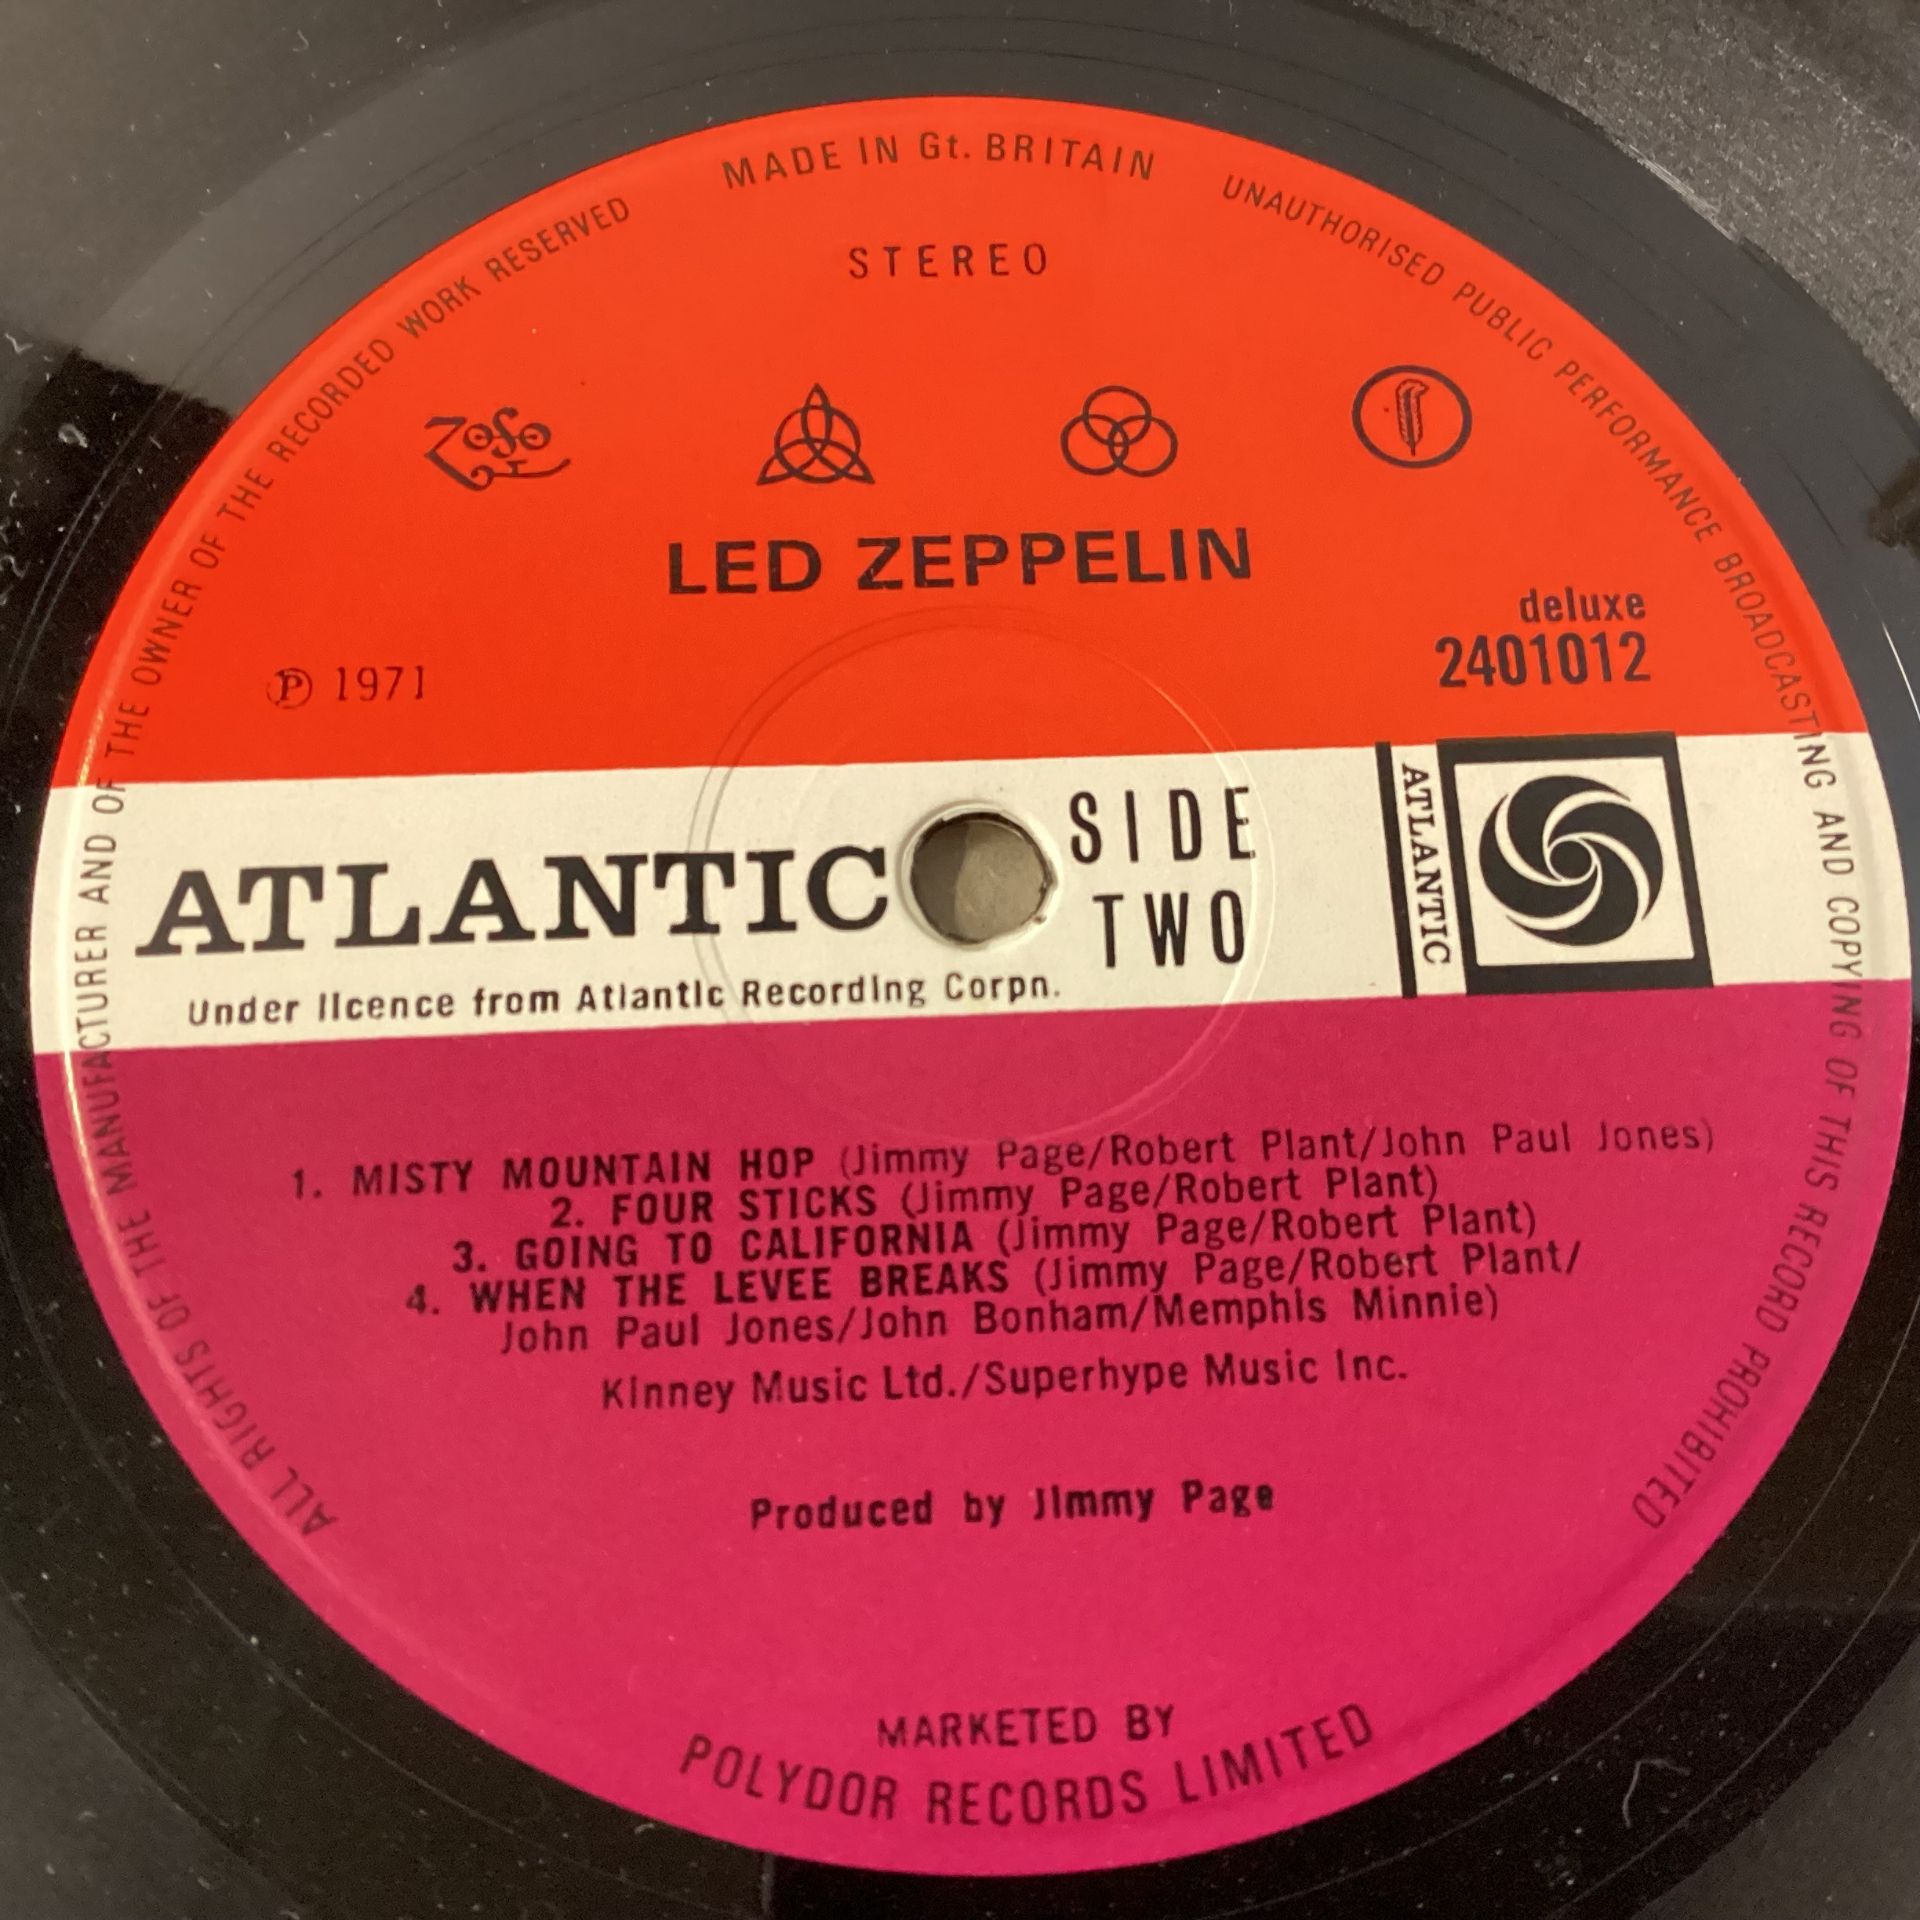 LED ZEPPELIN 1V (4) ATLANTIC RED PLUM LABEL. Rare UK 1971 Early Pressing on the Atlantic Plum and - Image 5 of 5